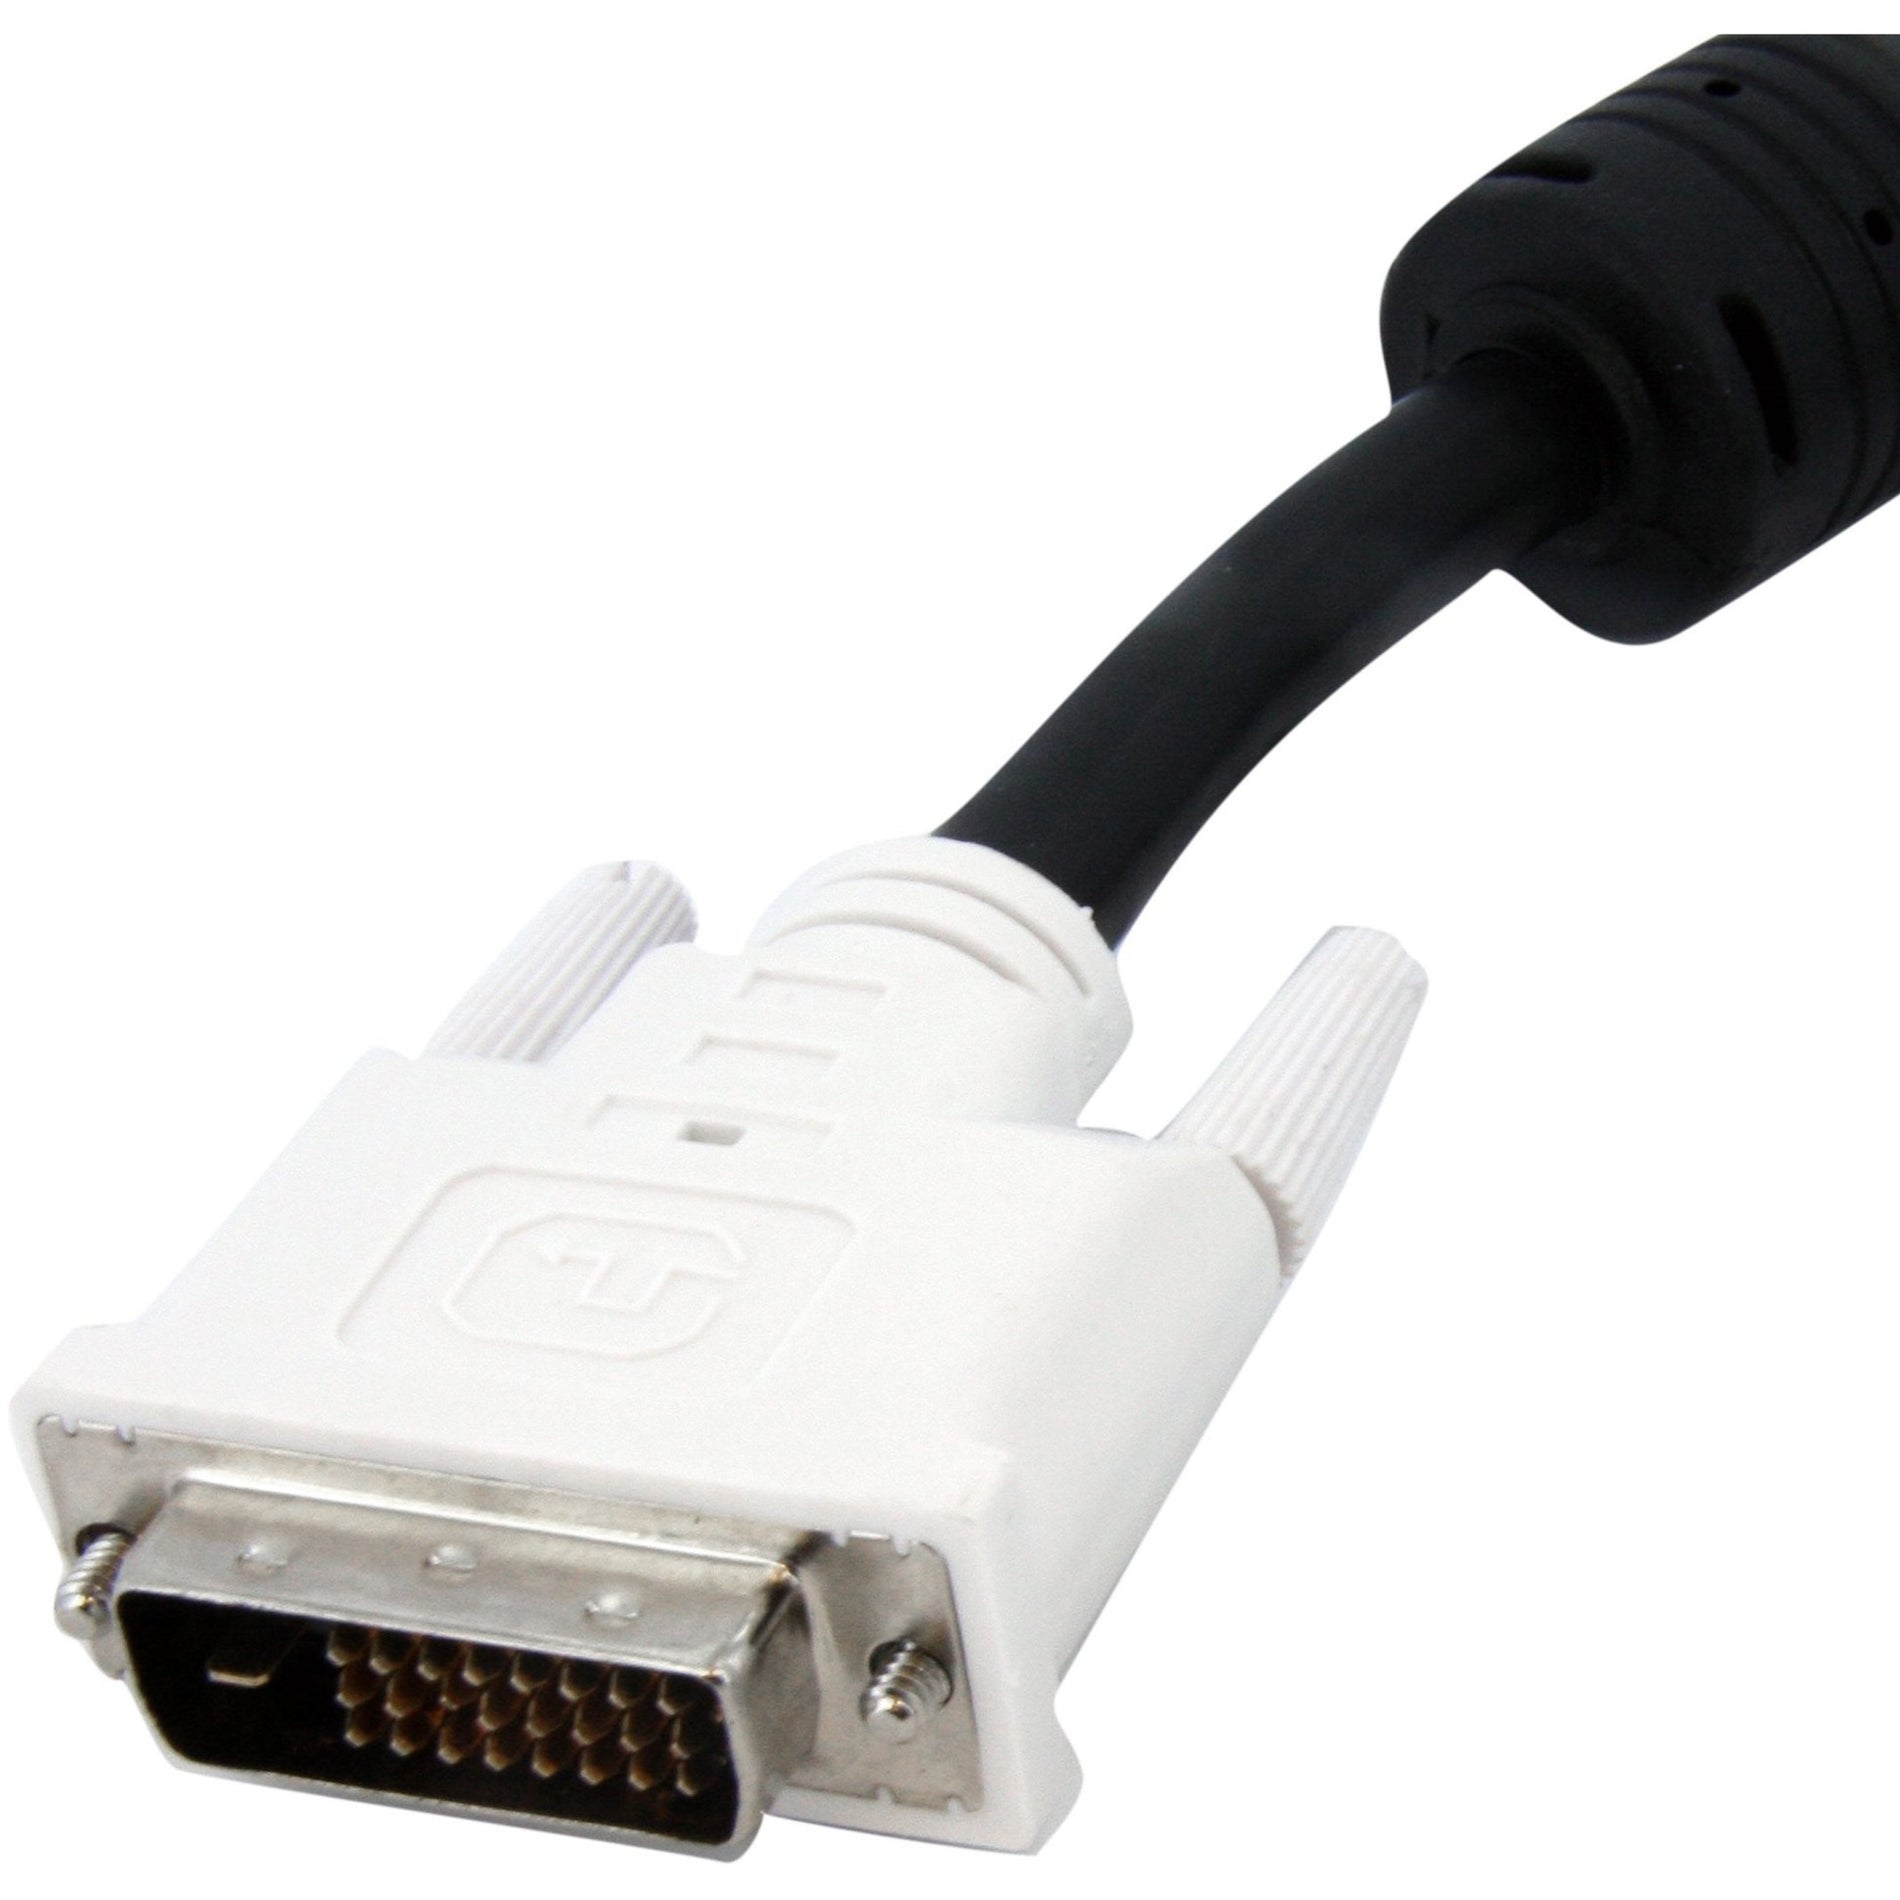 StarTech.com DVIDDMF6 6ft DVI-D DL Digital Video Monitor Cable, EMI Protection, 9.9 Gbit/s Data Transfer Rate, 2560 x 1600 Supported Resolution